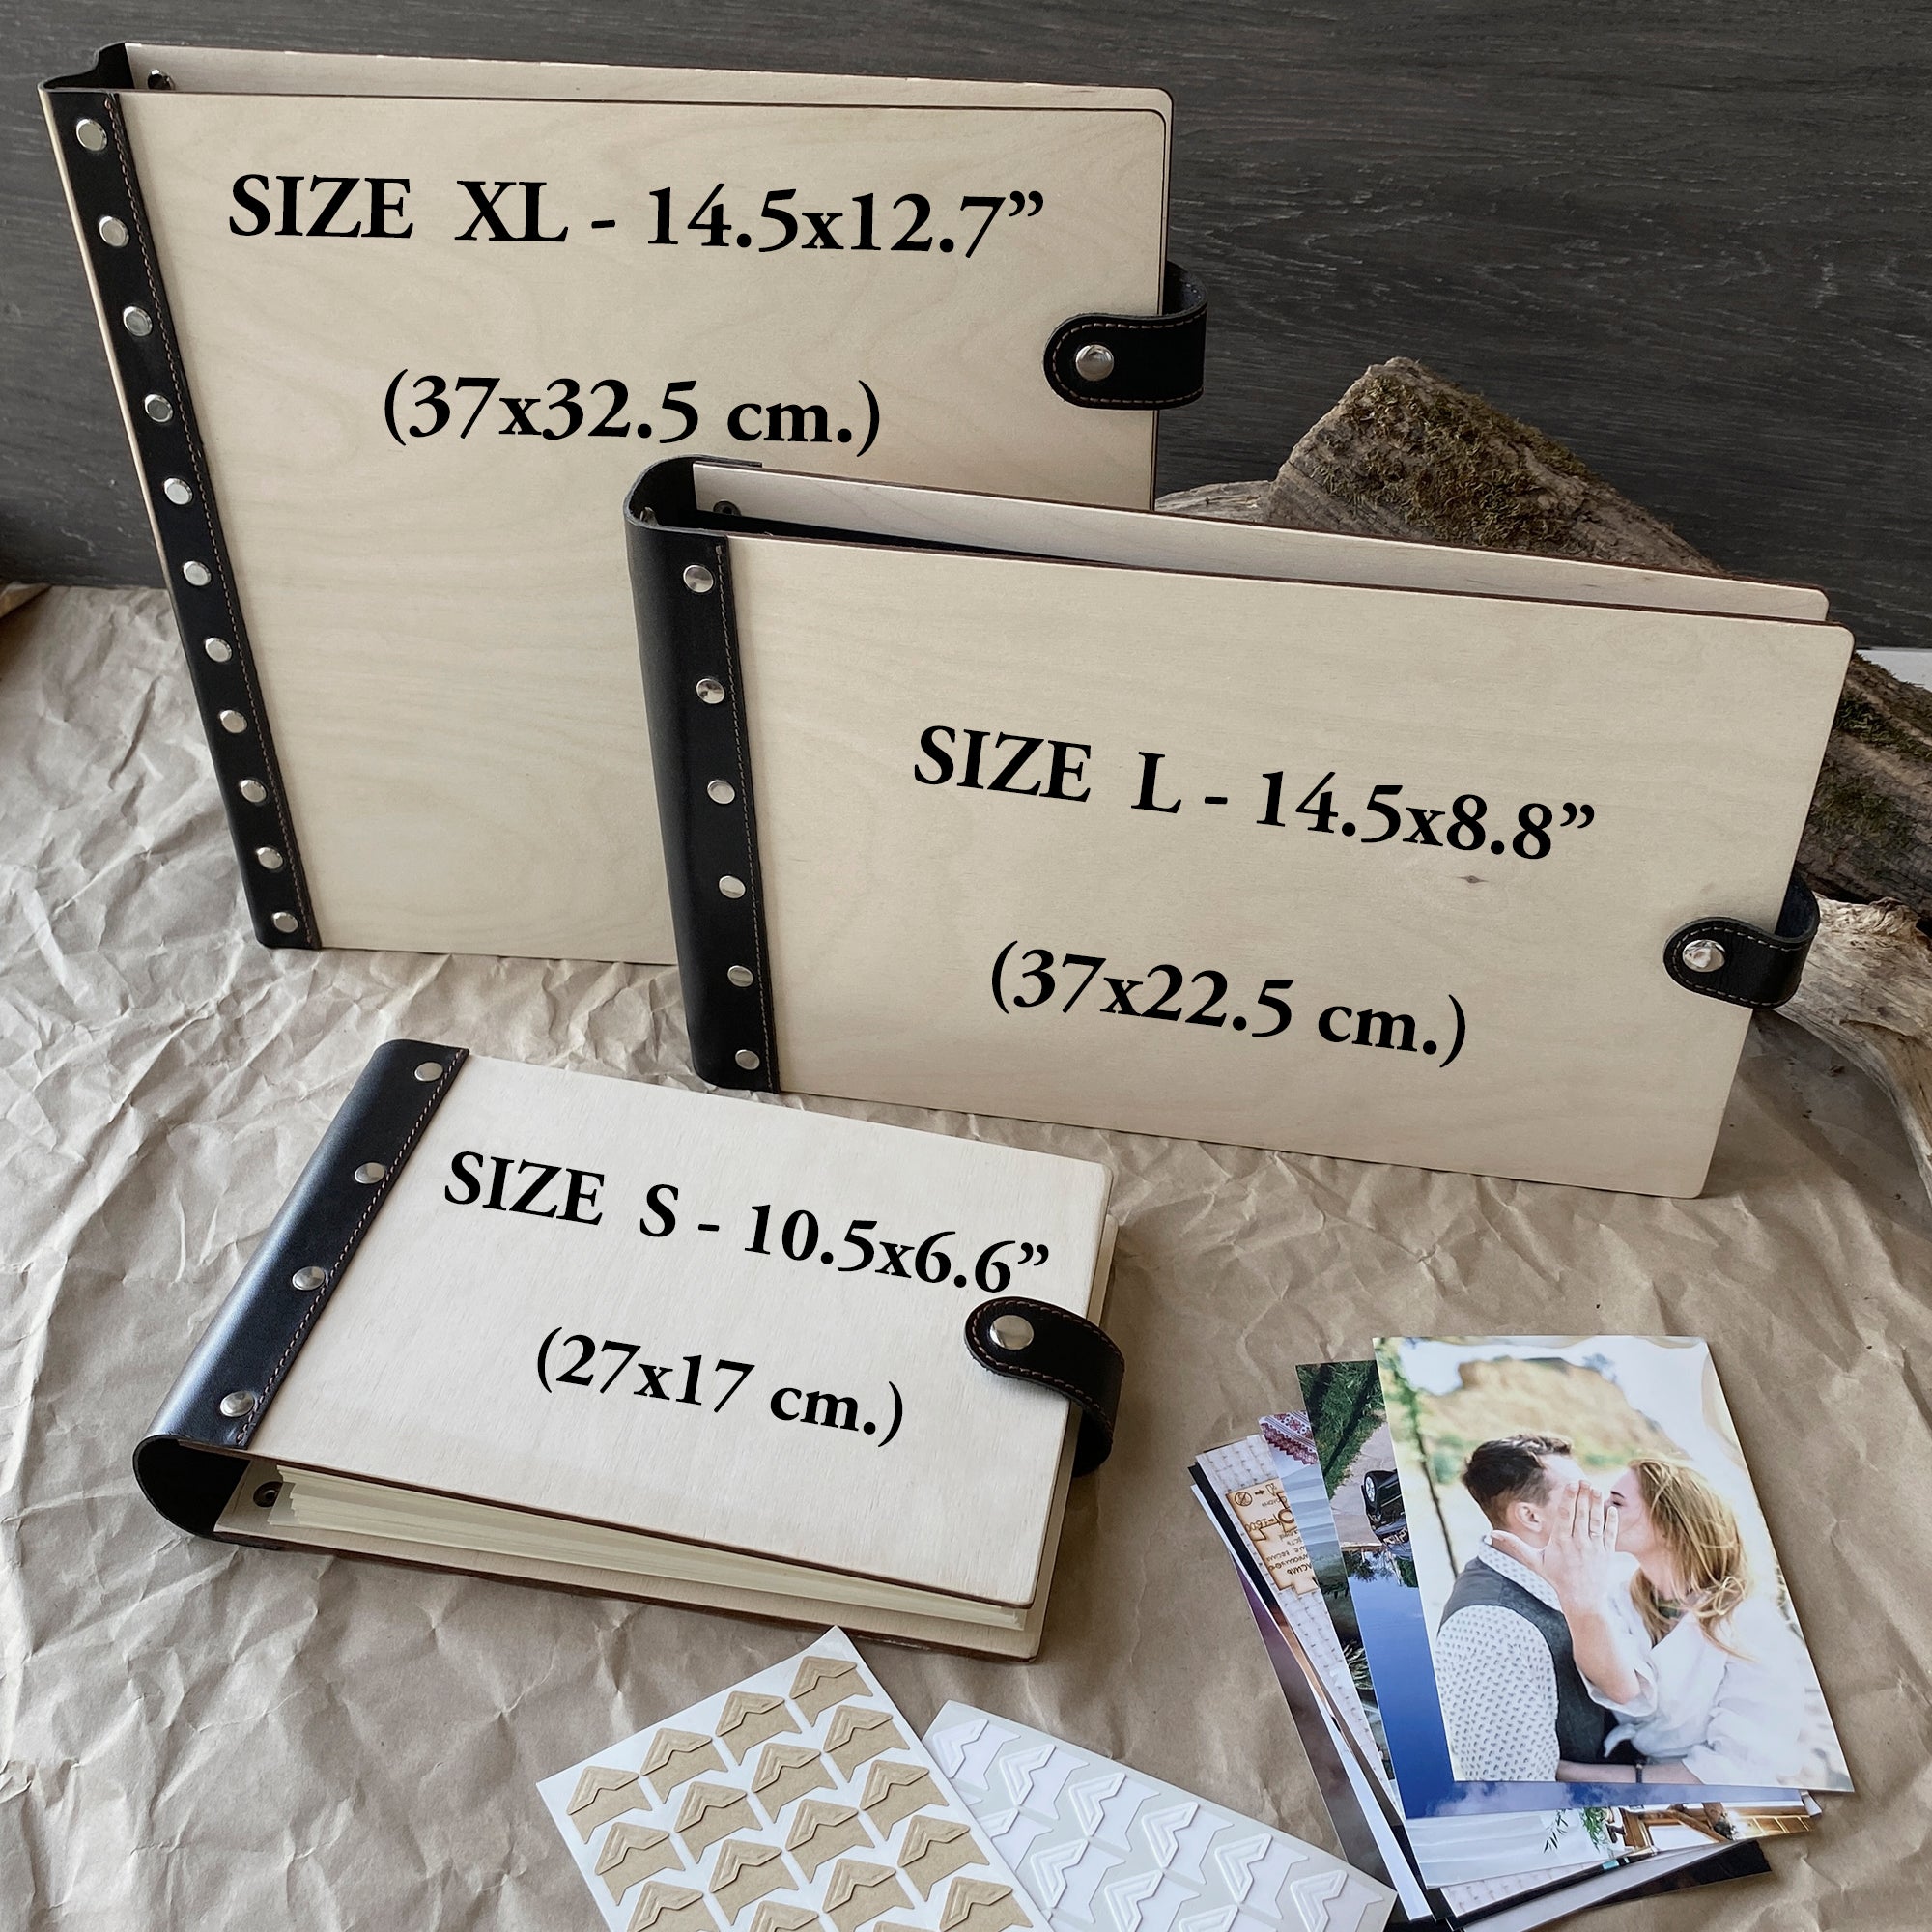 Personalized photo album with leather cover and World Map engraving